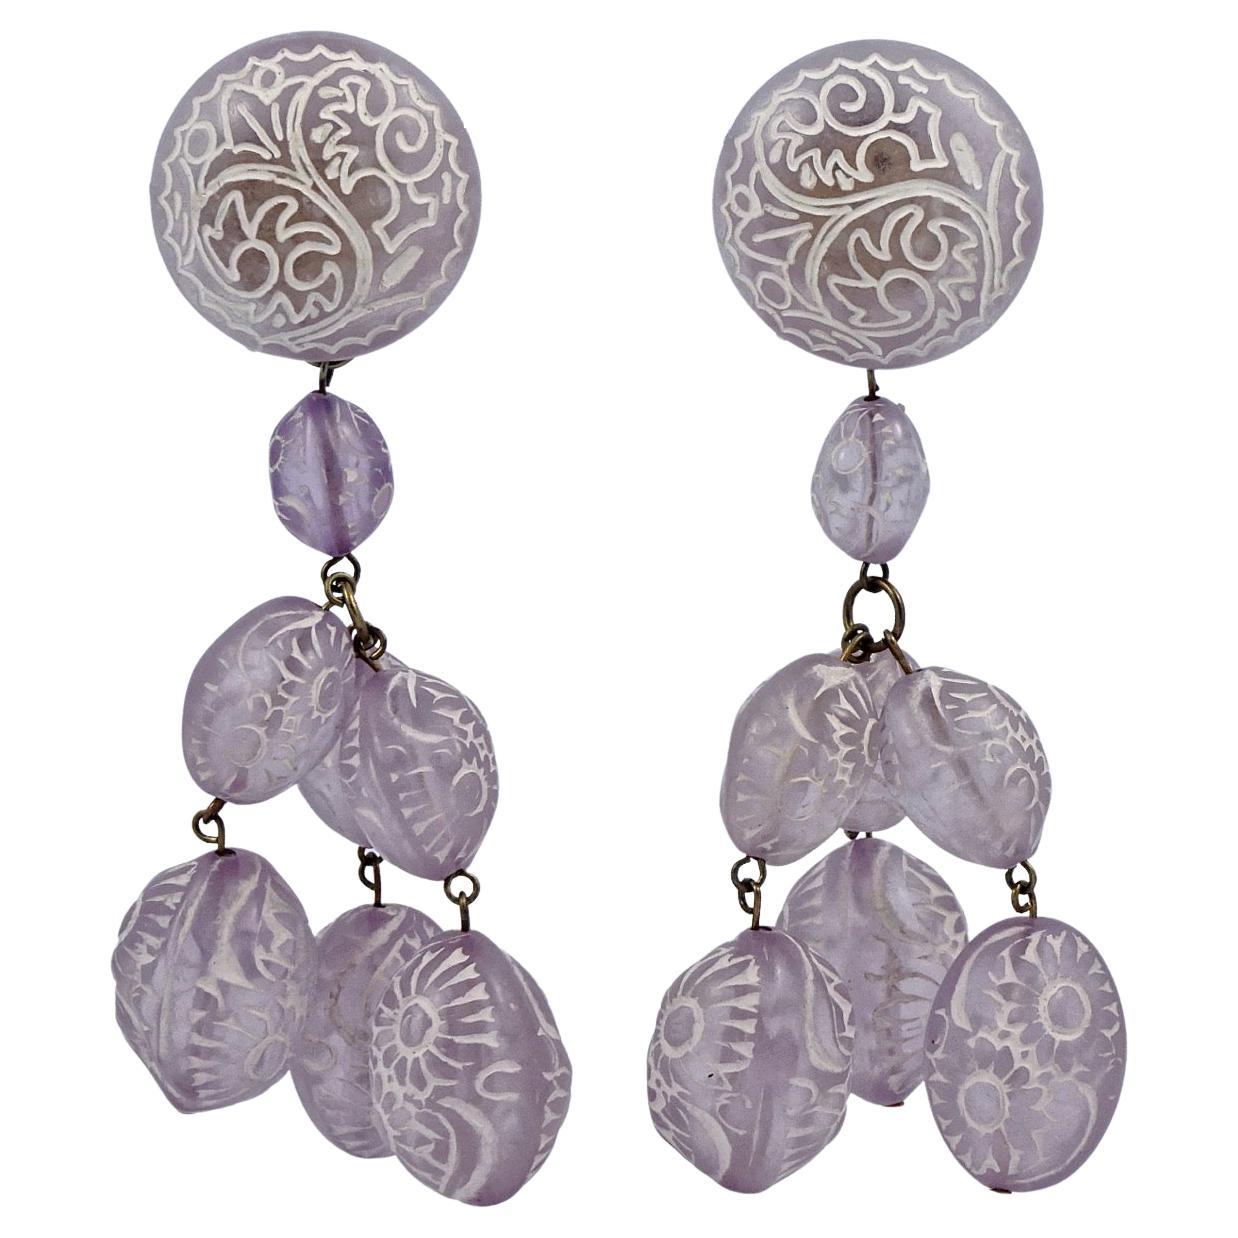 Gold Tone Lilac and White Etched Glass Clip on Drop Earrings circa 1960s